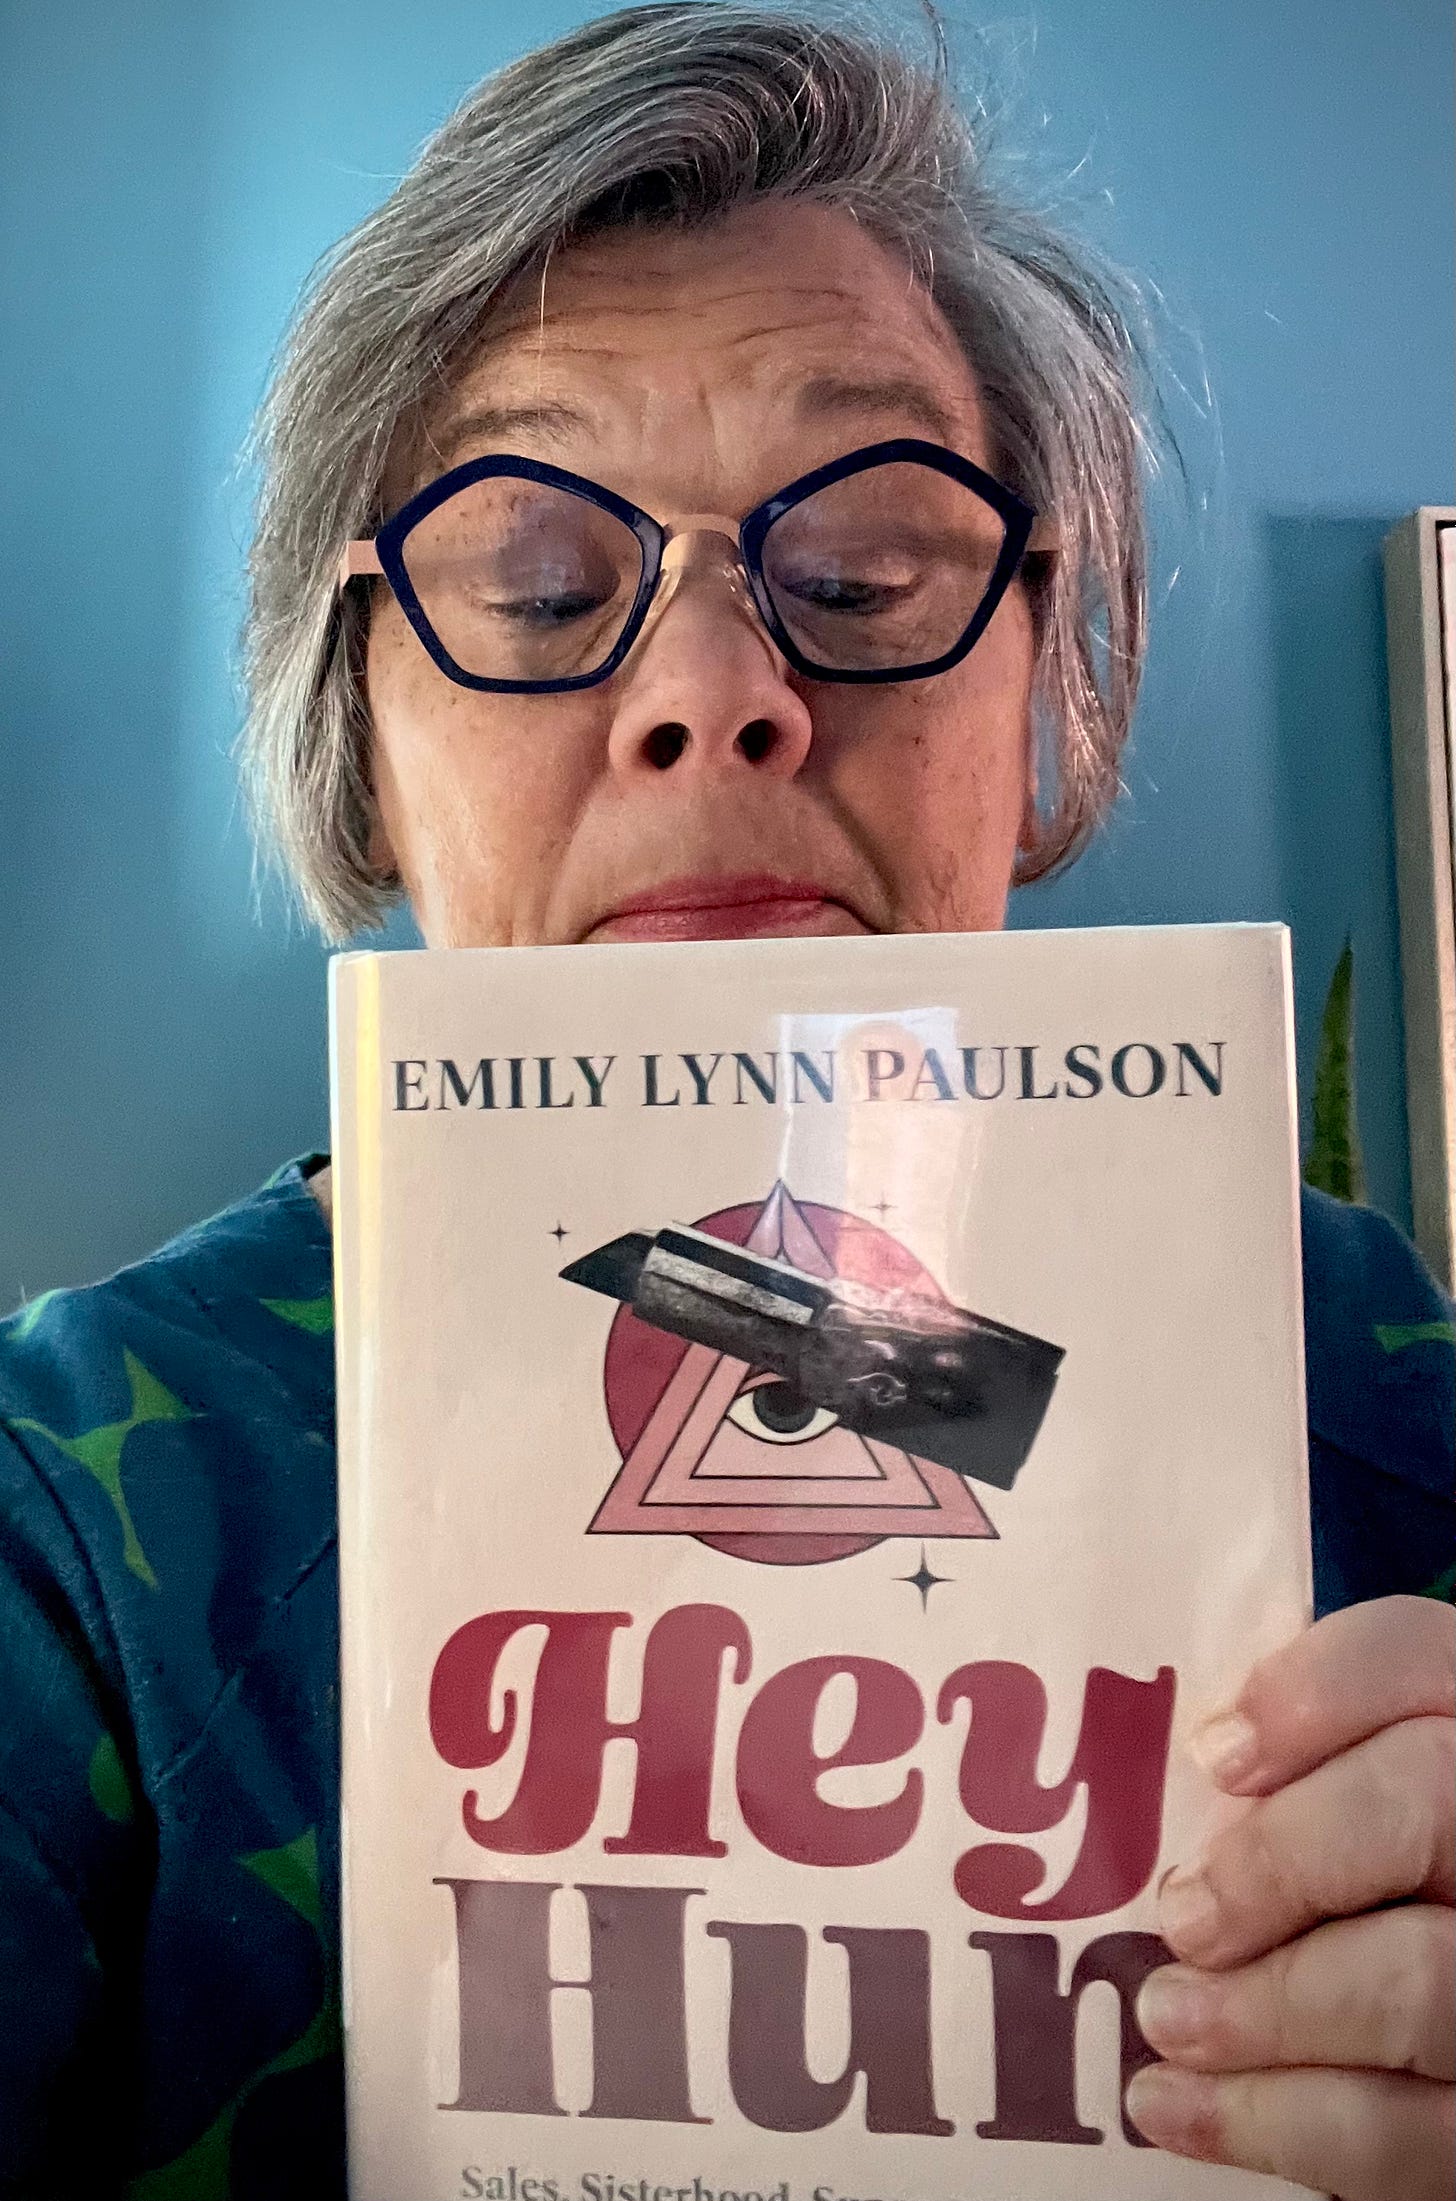 white woman looking down at the book "Hey Hun" by Emily Lynn Paulson